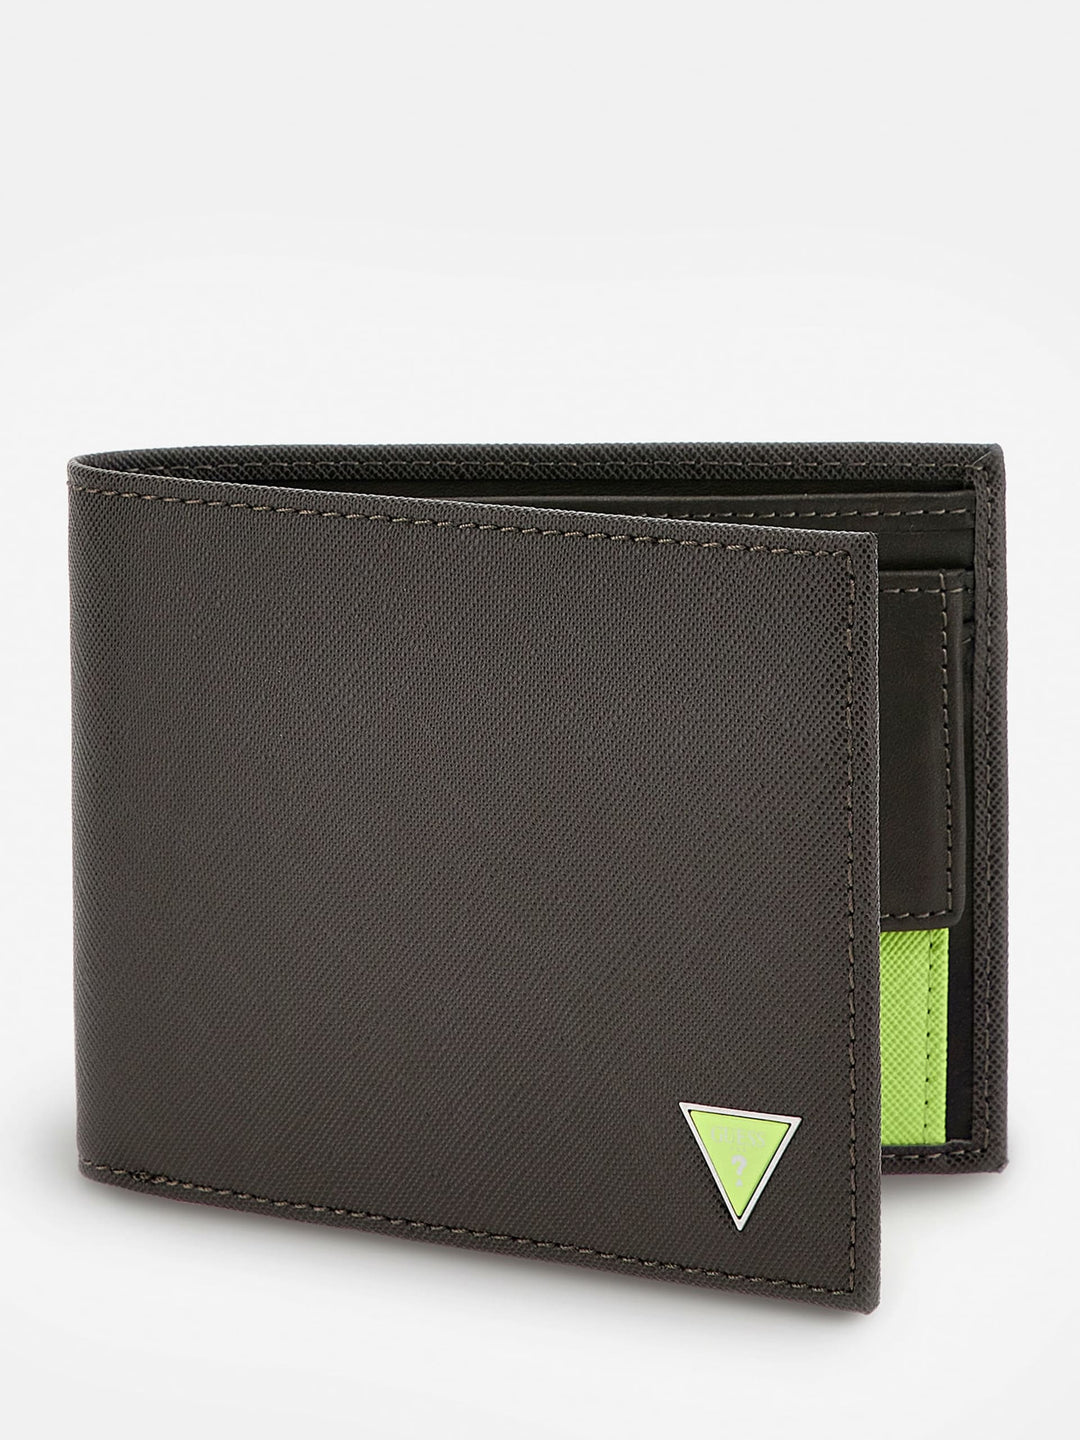 CERTOSA BILLFOLD WITH COIN POCKET - Guess